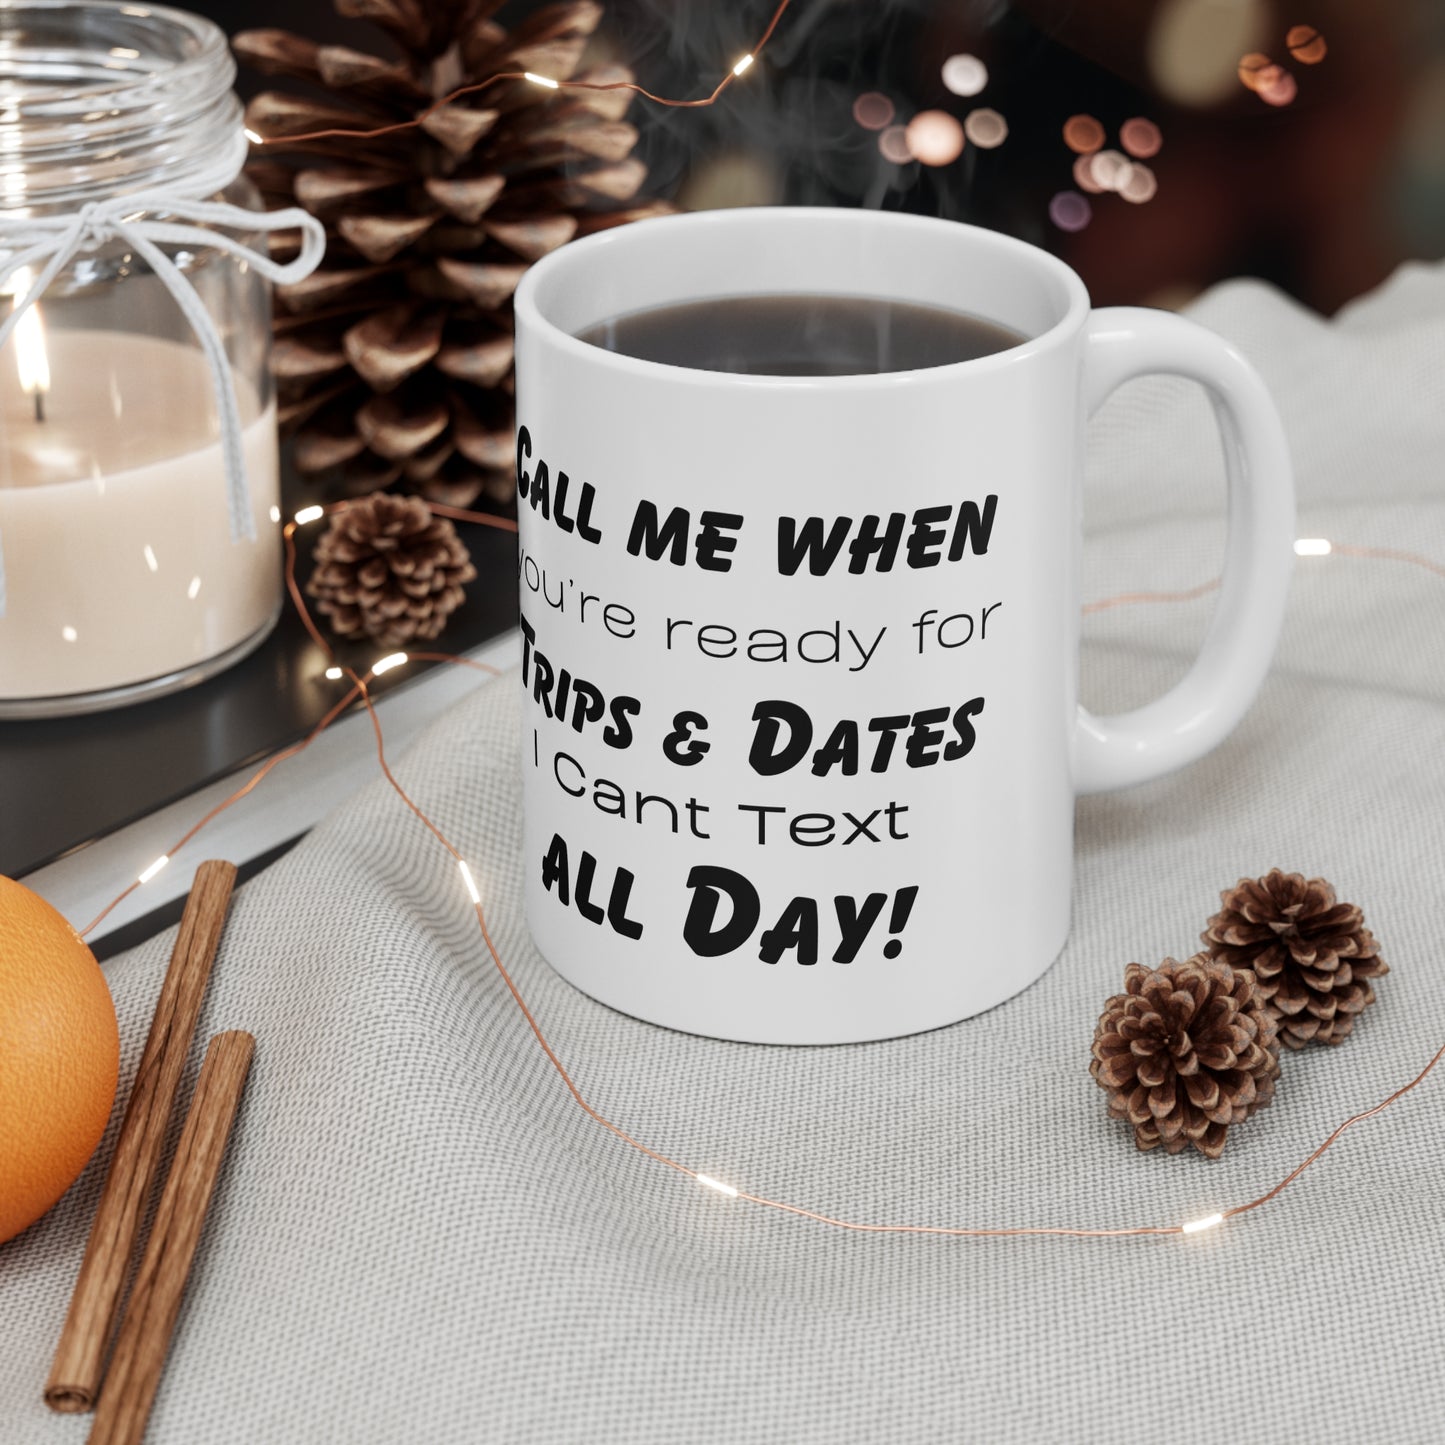 Call me when you're ready for trip & dates. I can't text all day! Ceramic Coffee Cups, 11oz, 15oz